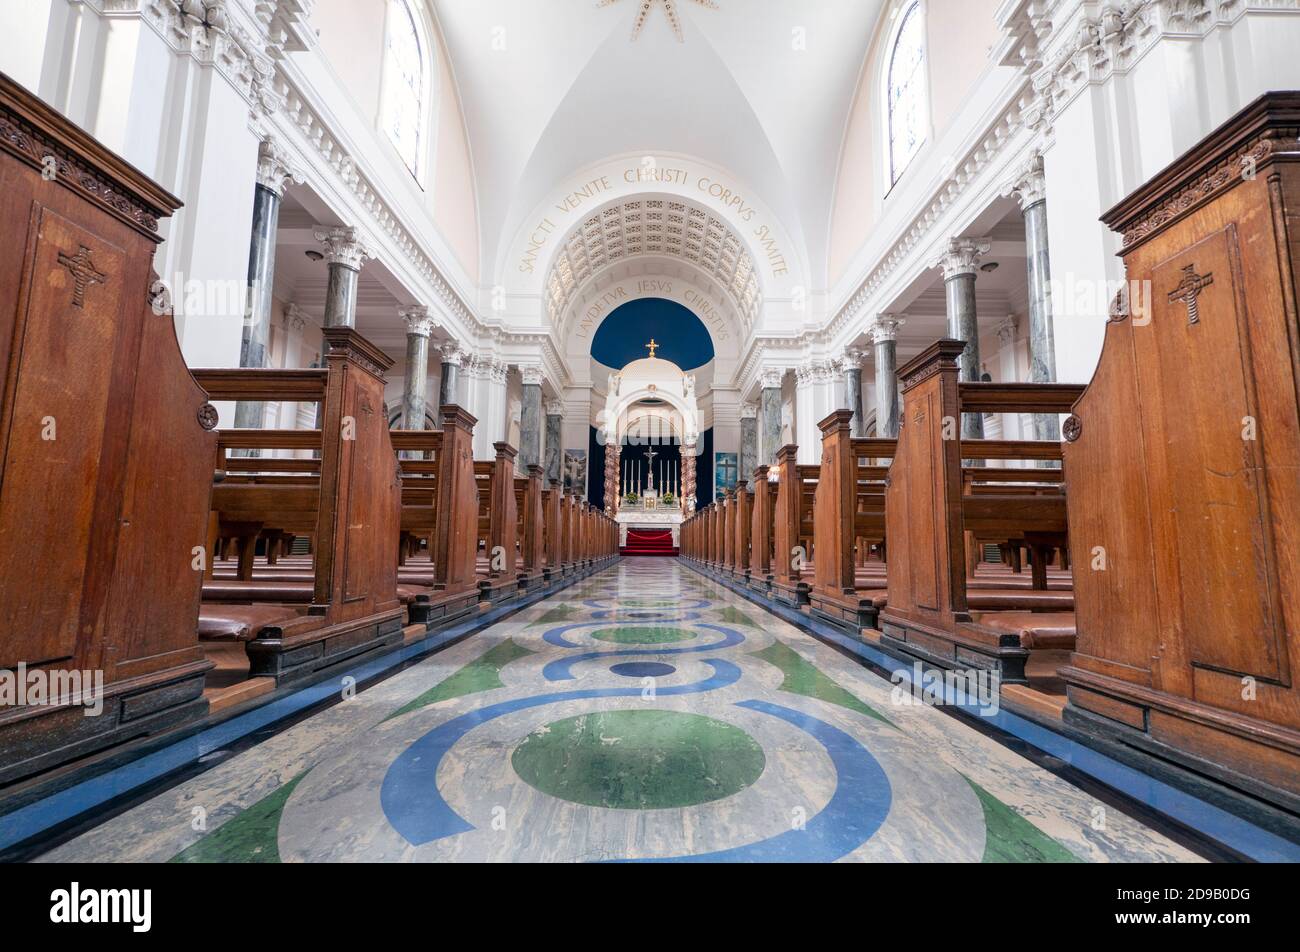 Interior view of the nave and altar at Catholic Cathedral Church of Saints Peter and Paul, Athlone, County Westmeath, Ireland,. Stock Photo